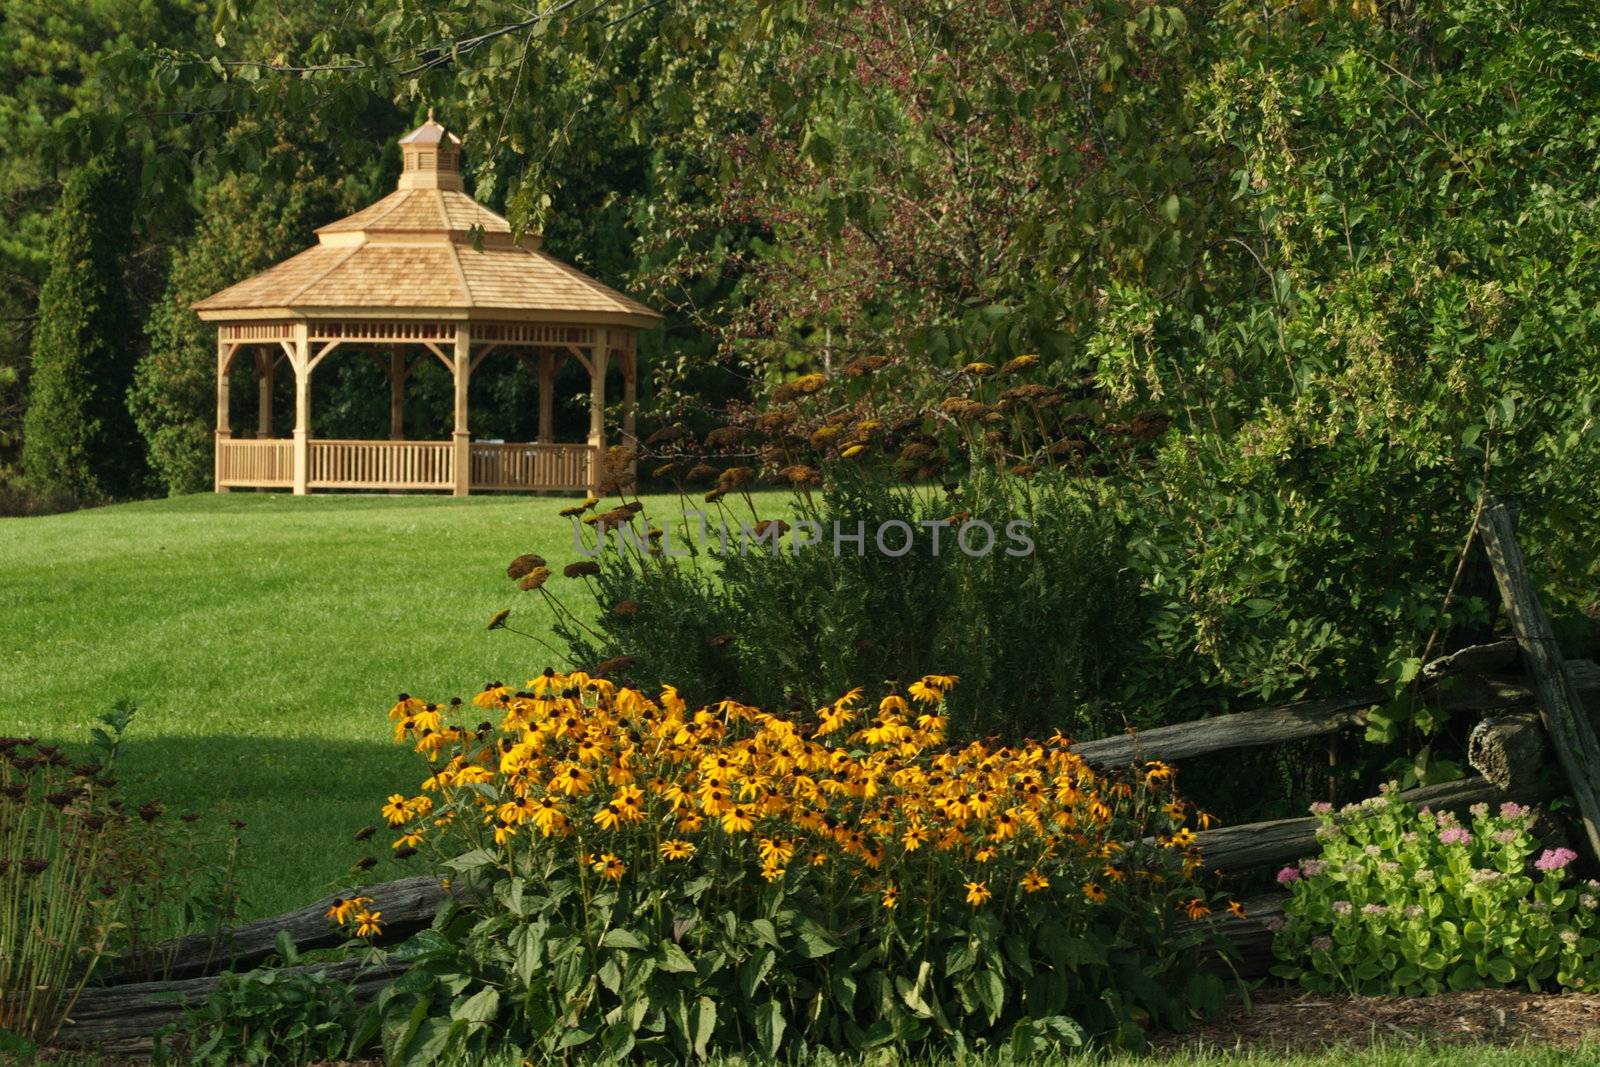 A gazebo in the distance at the University of Guelph Arboretum.